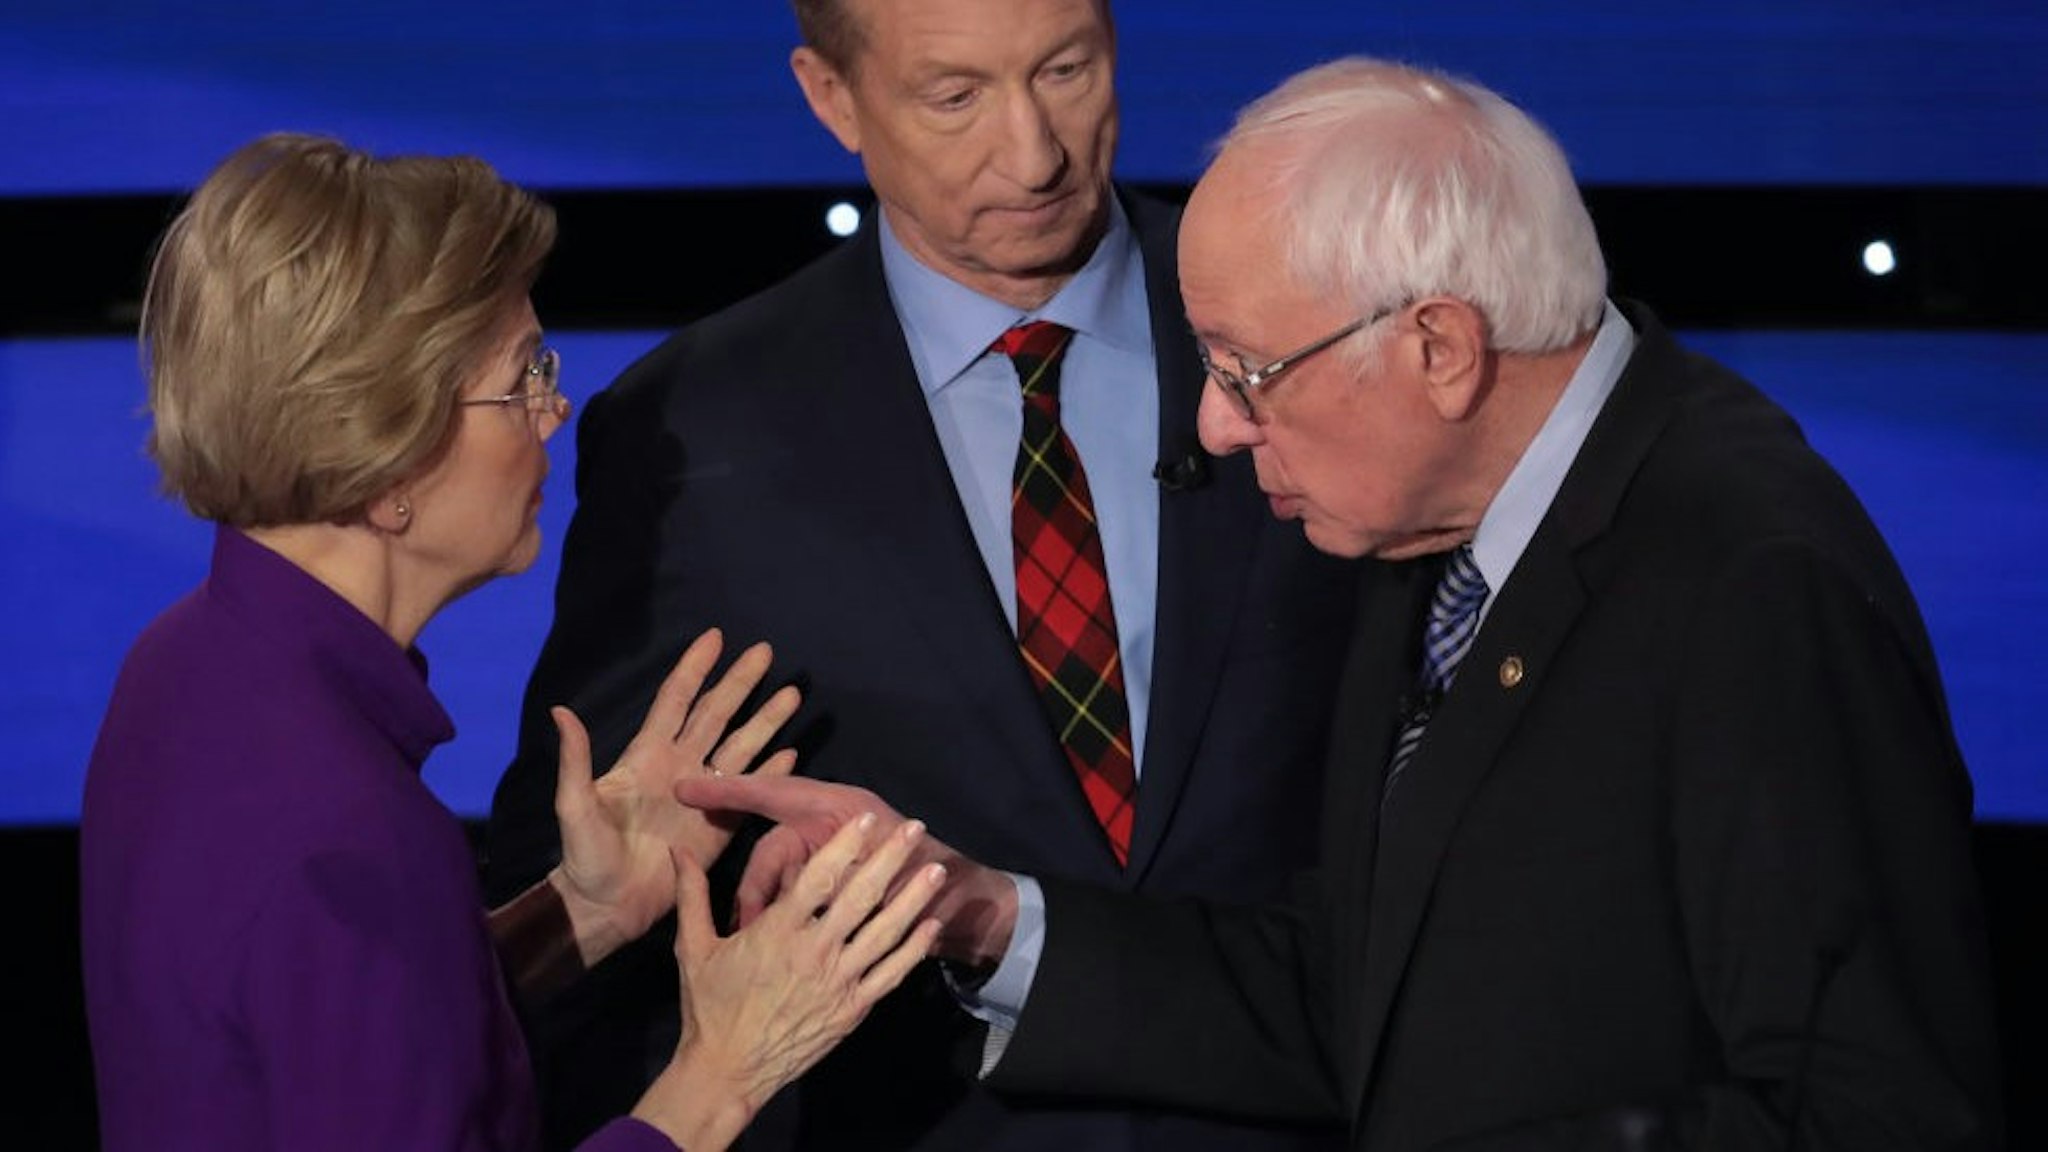 DES MOINES, IOWA - JANUARY 14: Sen. Elizabeth Warren (D-MA) and Sen. Bernie Sanders (I-VT) speak as Tom Steyer looks on after the Democratic presidential primary debate at Drake University on January 14, 2020 in Des Moines, Iowa. Six candidates out of the field qualified for the first Democratic presidential primary debate of 2020, hosted by CNN and the Des Moines Register. (Photo by